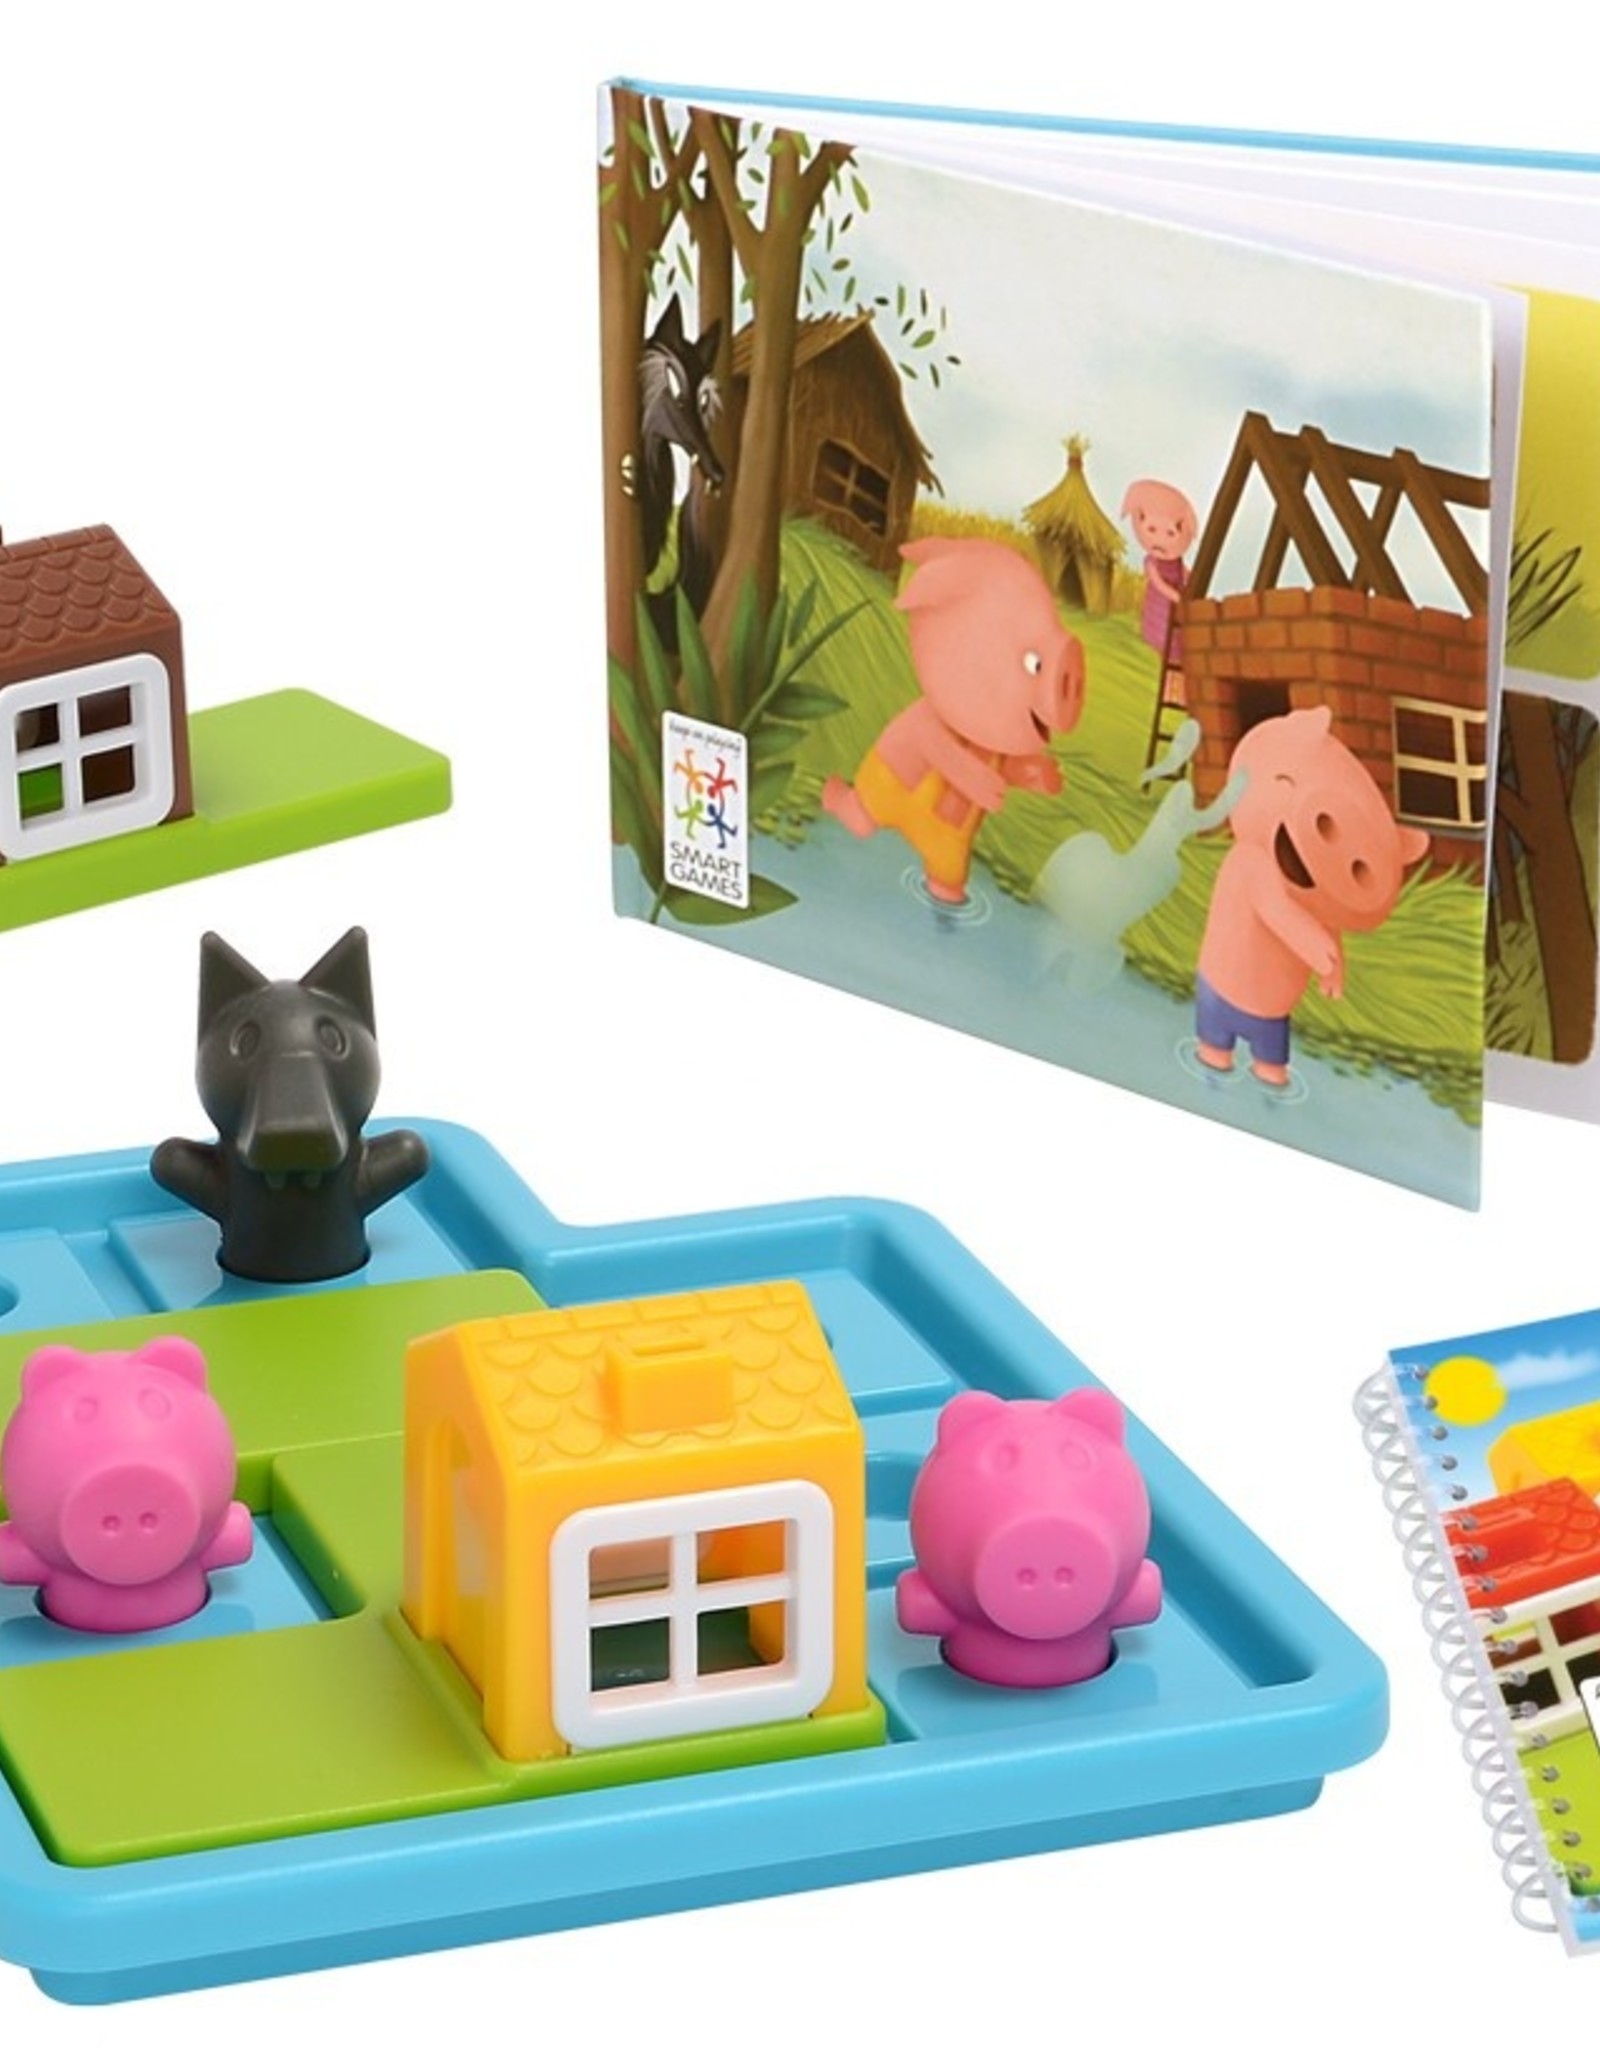 SMART TOYS AND GAMES THREE LITTLE PIGGIES